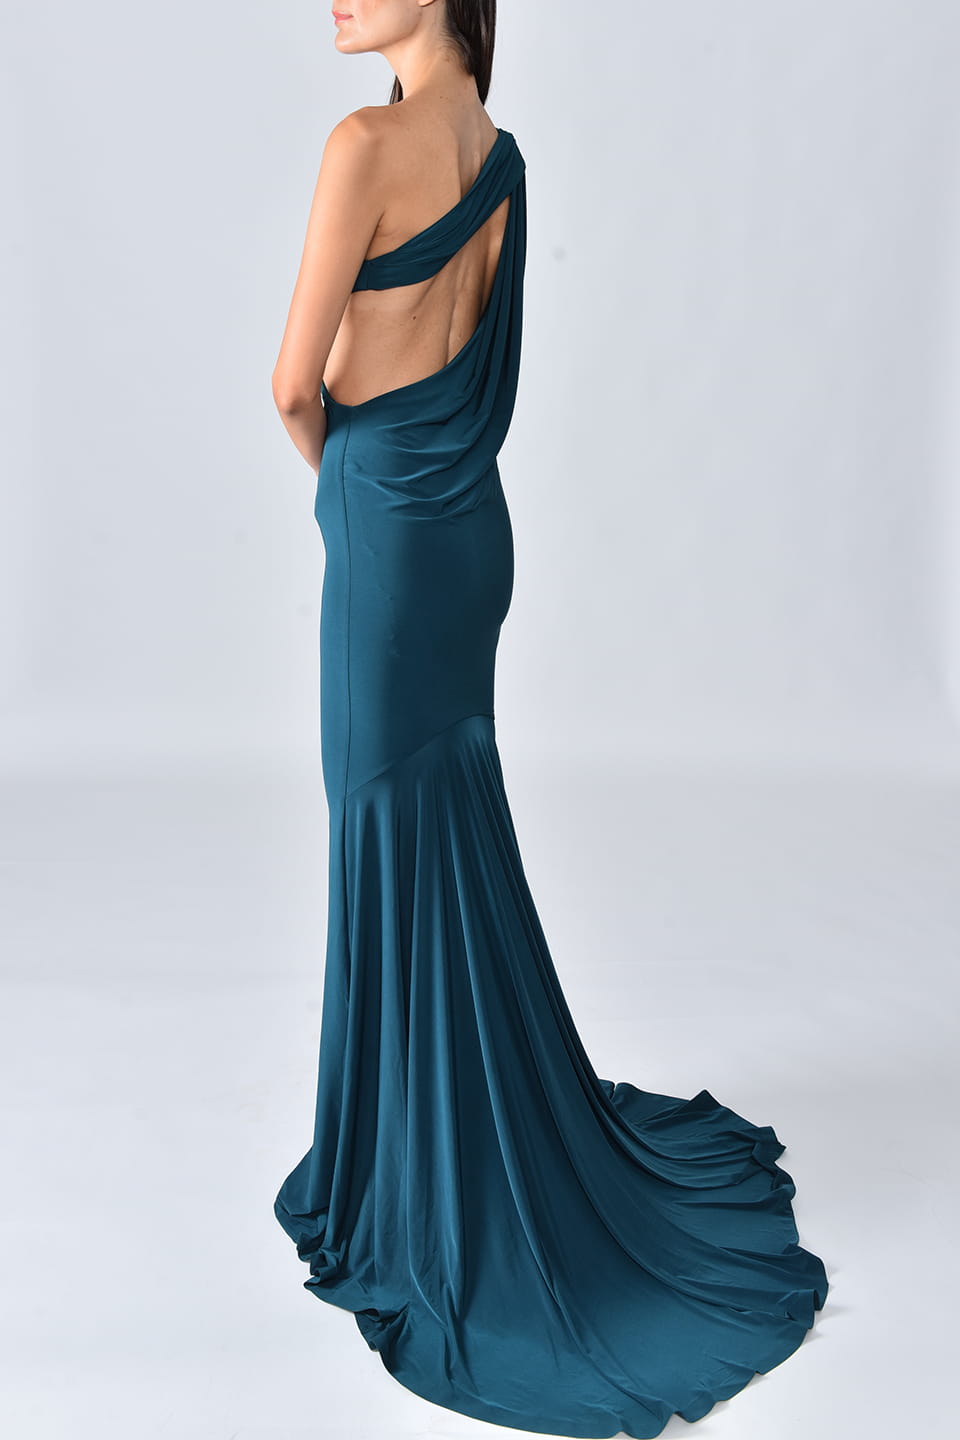 Model wears Special occasion Maxi dress in Petrol Blue color from Hamel fashion stylist, posing from left - back side